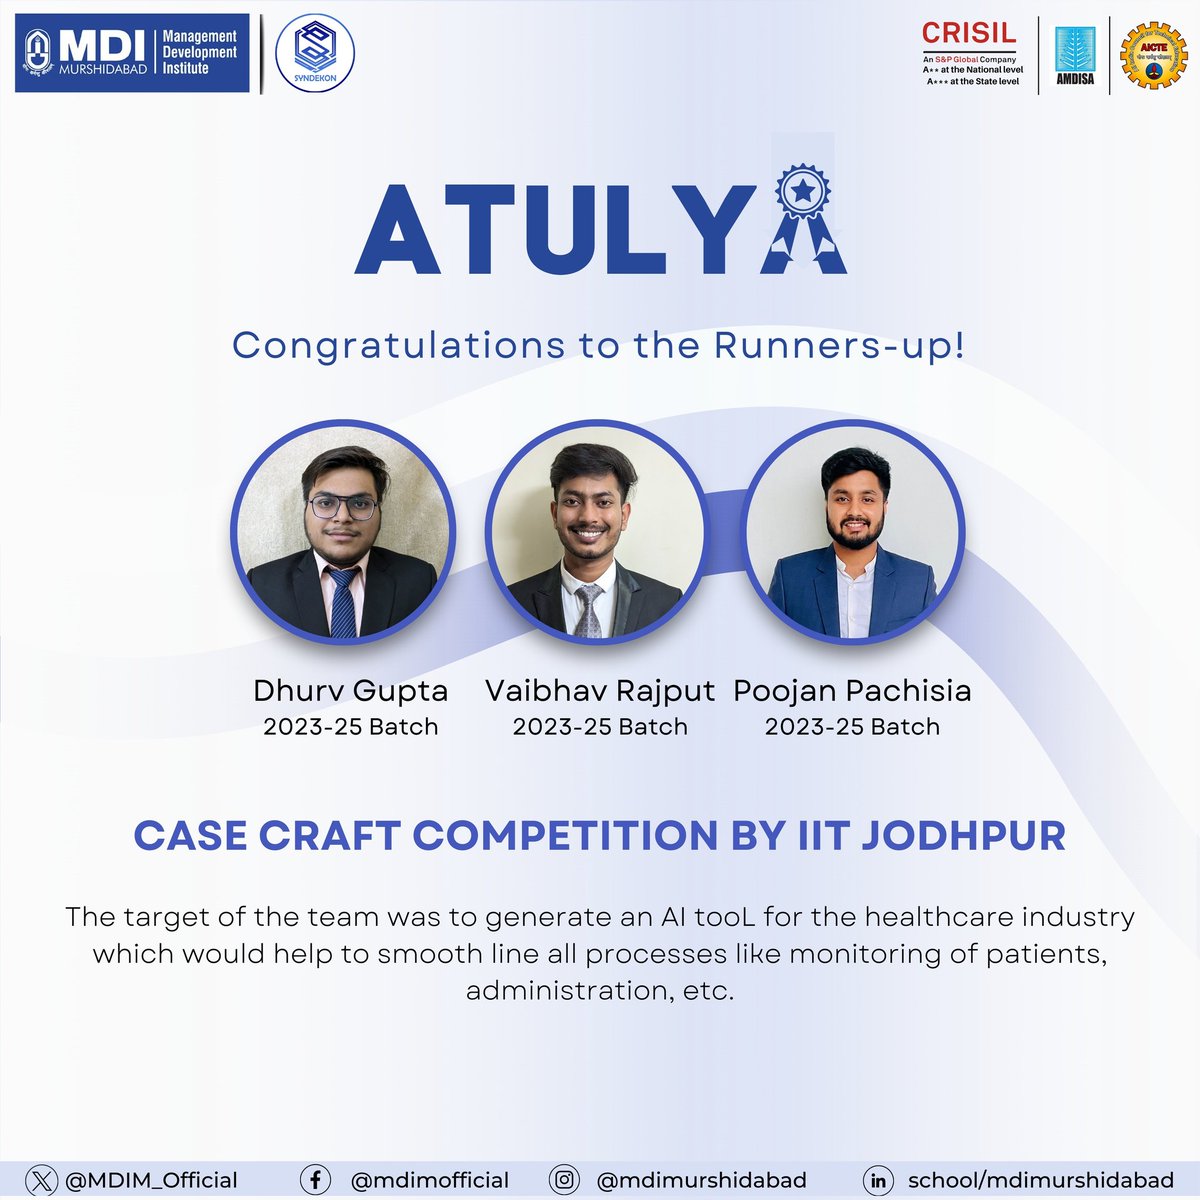 With immense pride, #MDIM announces that Vaibhav Rajput, Dhruv Gupta & Poojan Pachisia have secured the Runners-up position in Case Craft #Competition conducted by IIT Jodhpur. The team generated an AI tool for the healthcare industry. #Competition #MDI #MBA